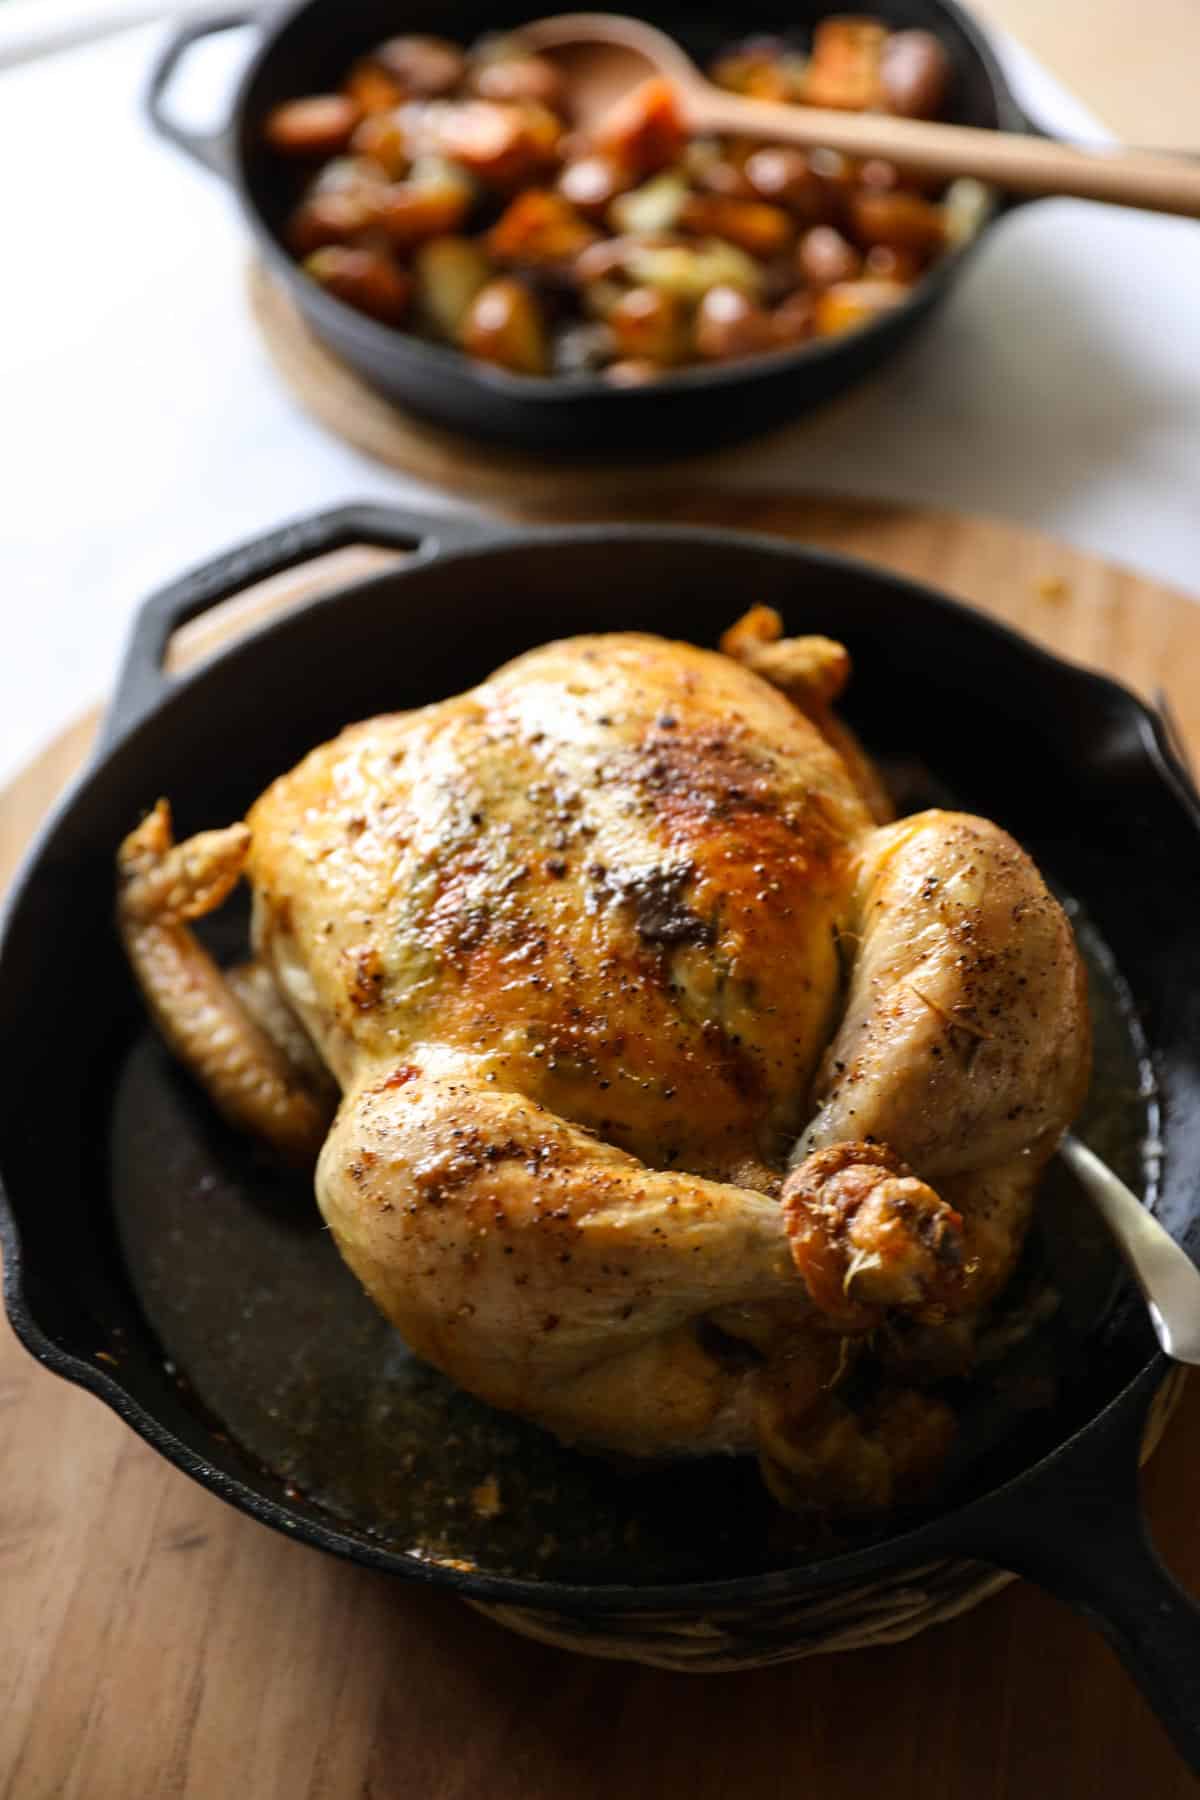 a roasted chicken in a cast iron skillet with a skillet of roasted root vegetables